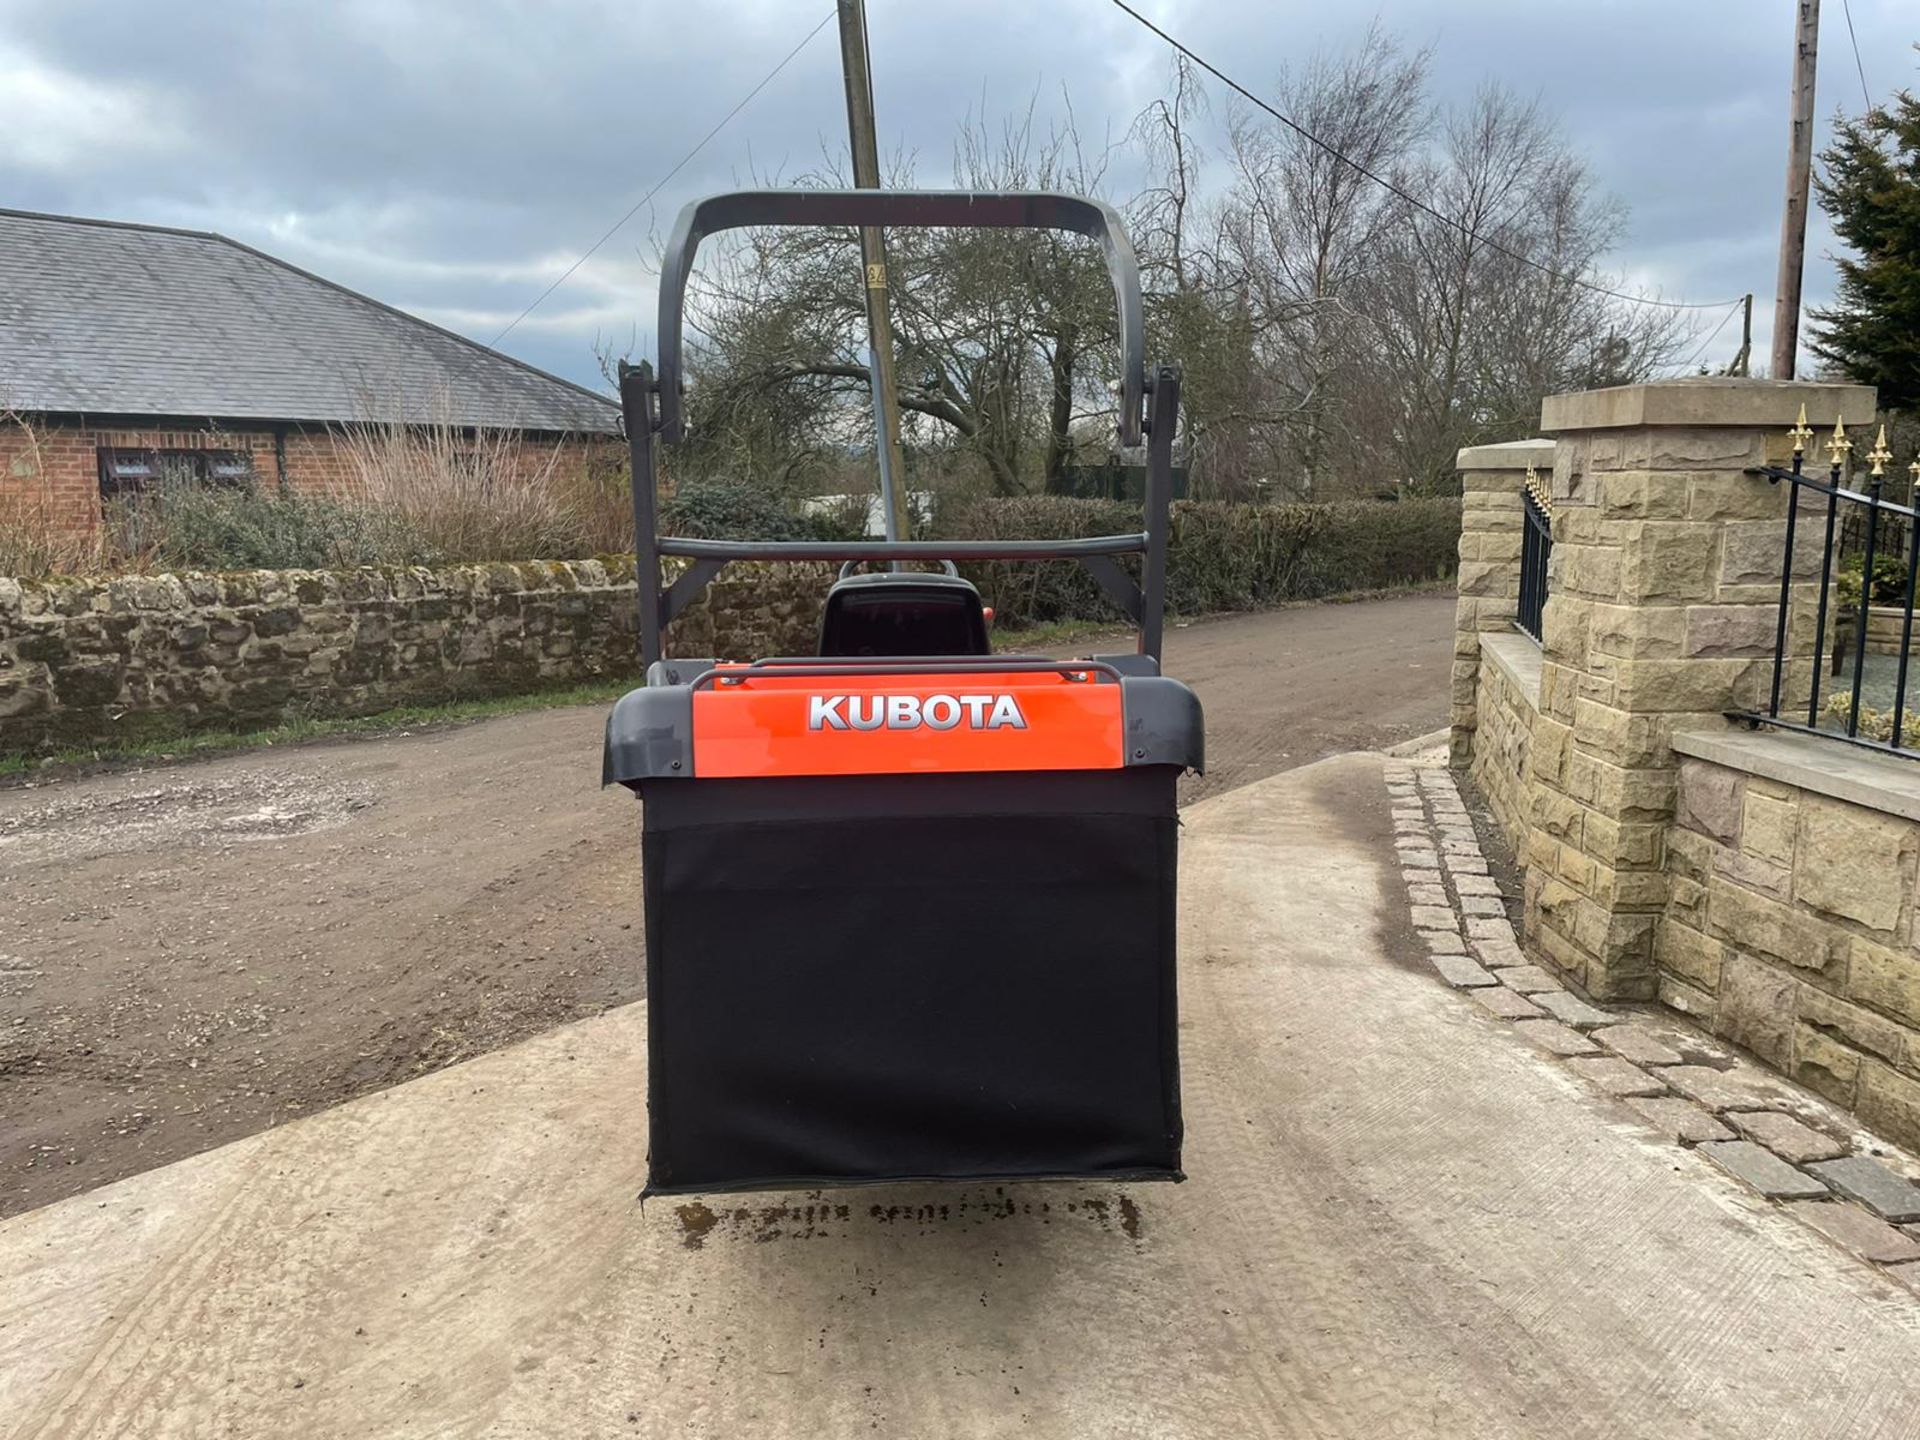 2015 KUBOTA G23-II RIDE ON MOWER, RUNS, DRIVES AND CUTS, IN MINT CONDITION, LOW 205 HOURS FROM NEW! - Image 7 of 8